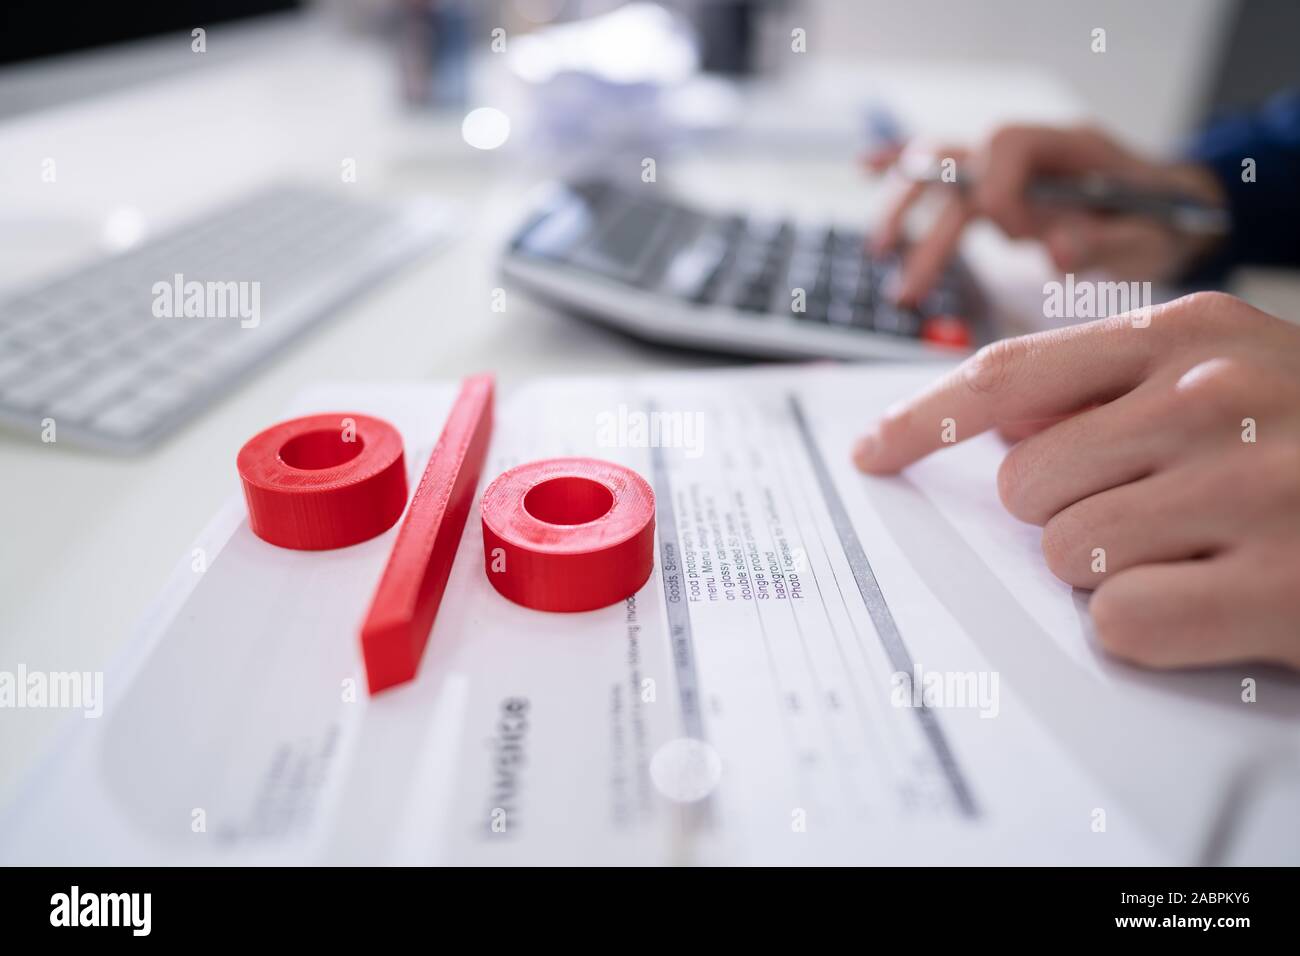 Close-up Of Red Percentage Symbol In Front Of Businessperson Calculating Invoice Stock Photo